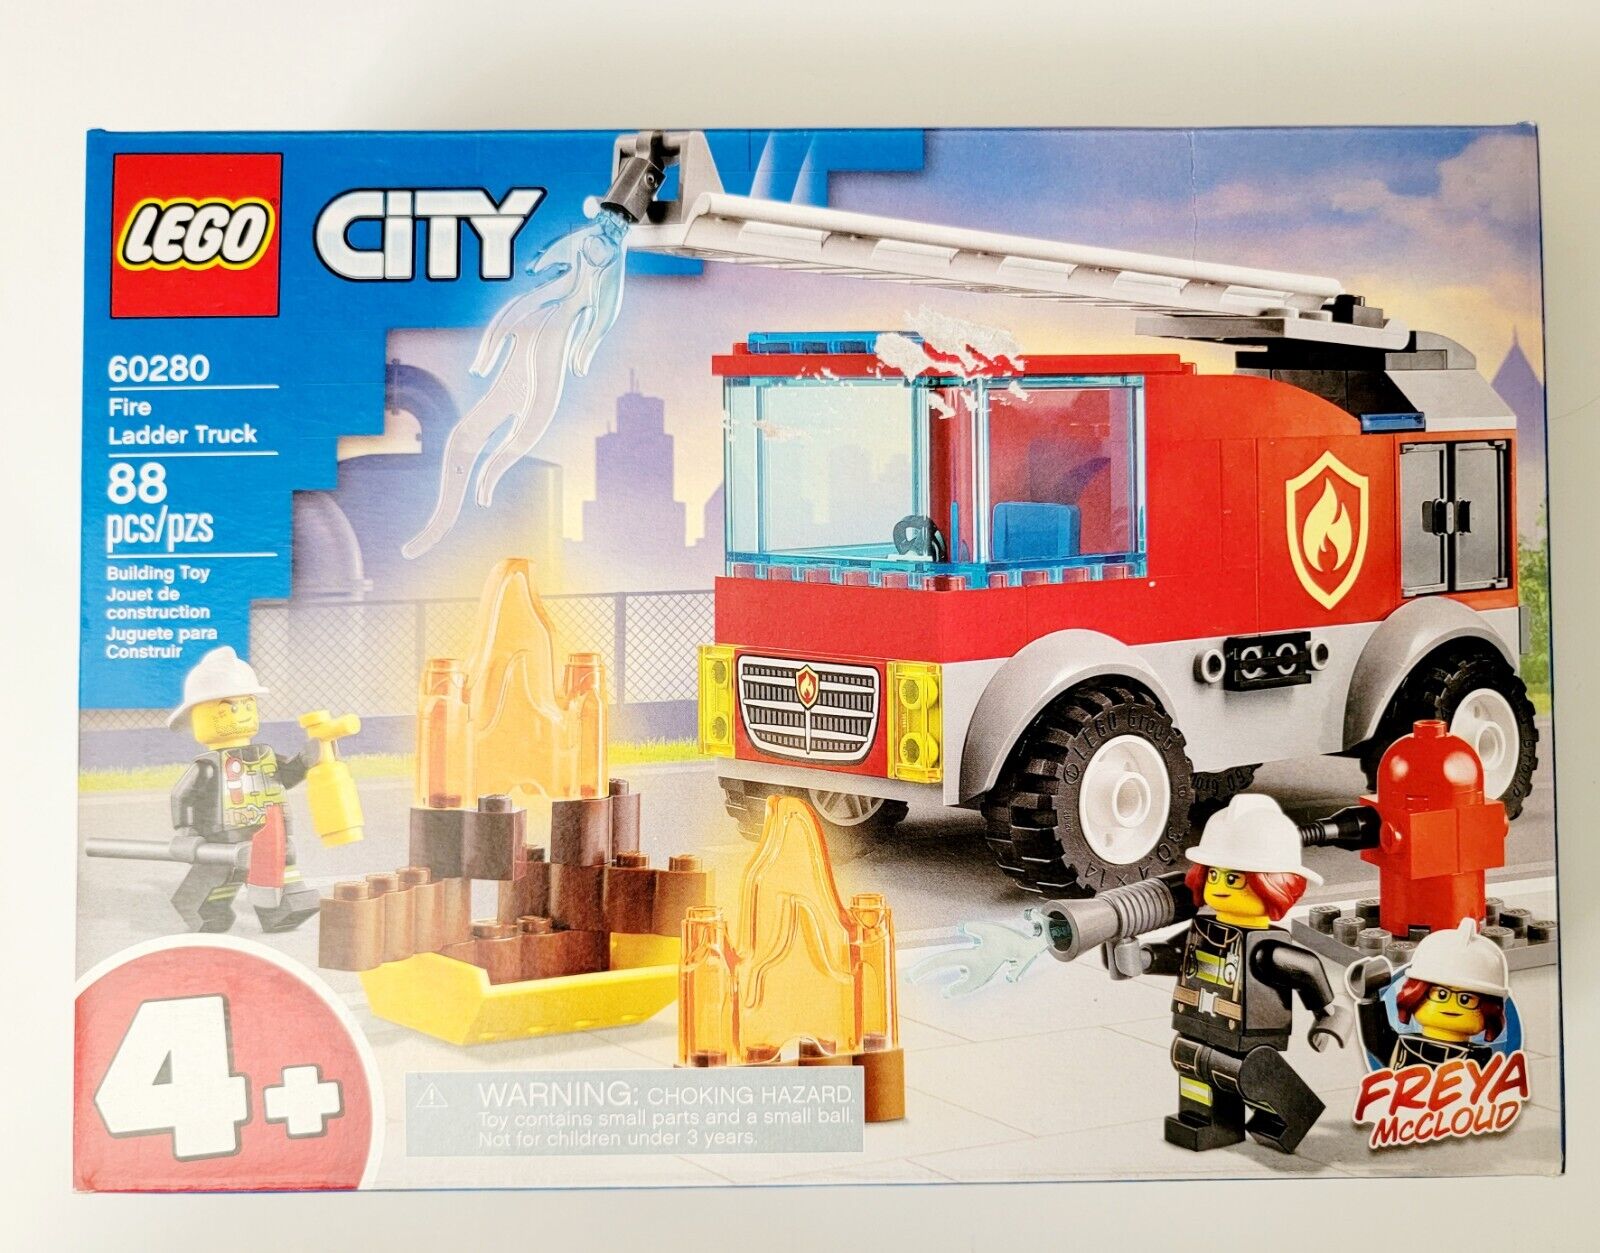 LEGO CITY: Fire Ladder Truck (60280)- See Pics